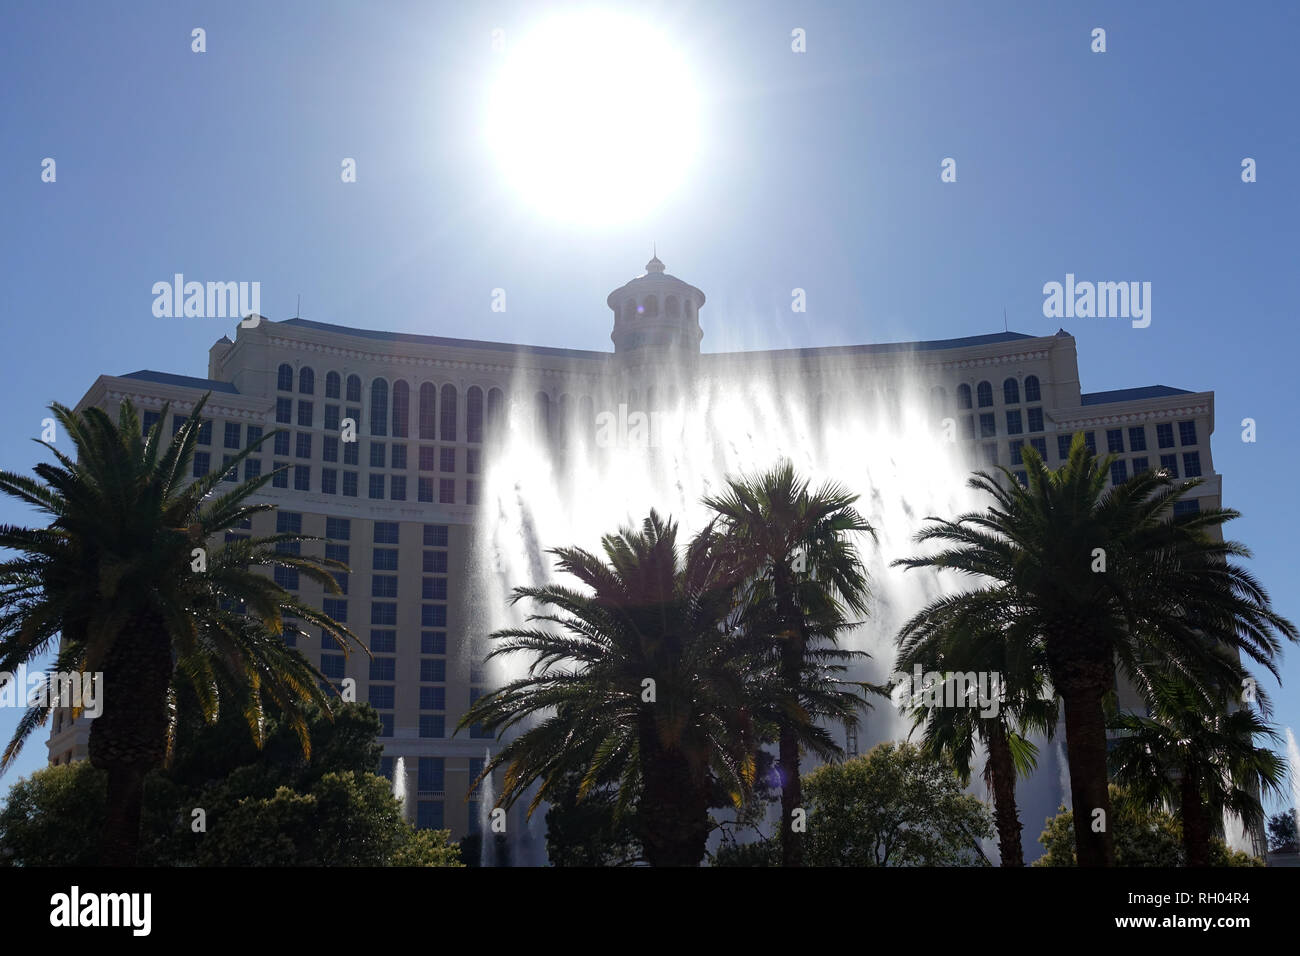 The fountains on display outside of the Bellagio Casino in Las Vegas, Nevada. Stock Photo